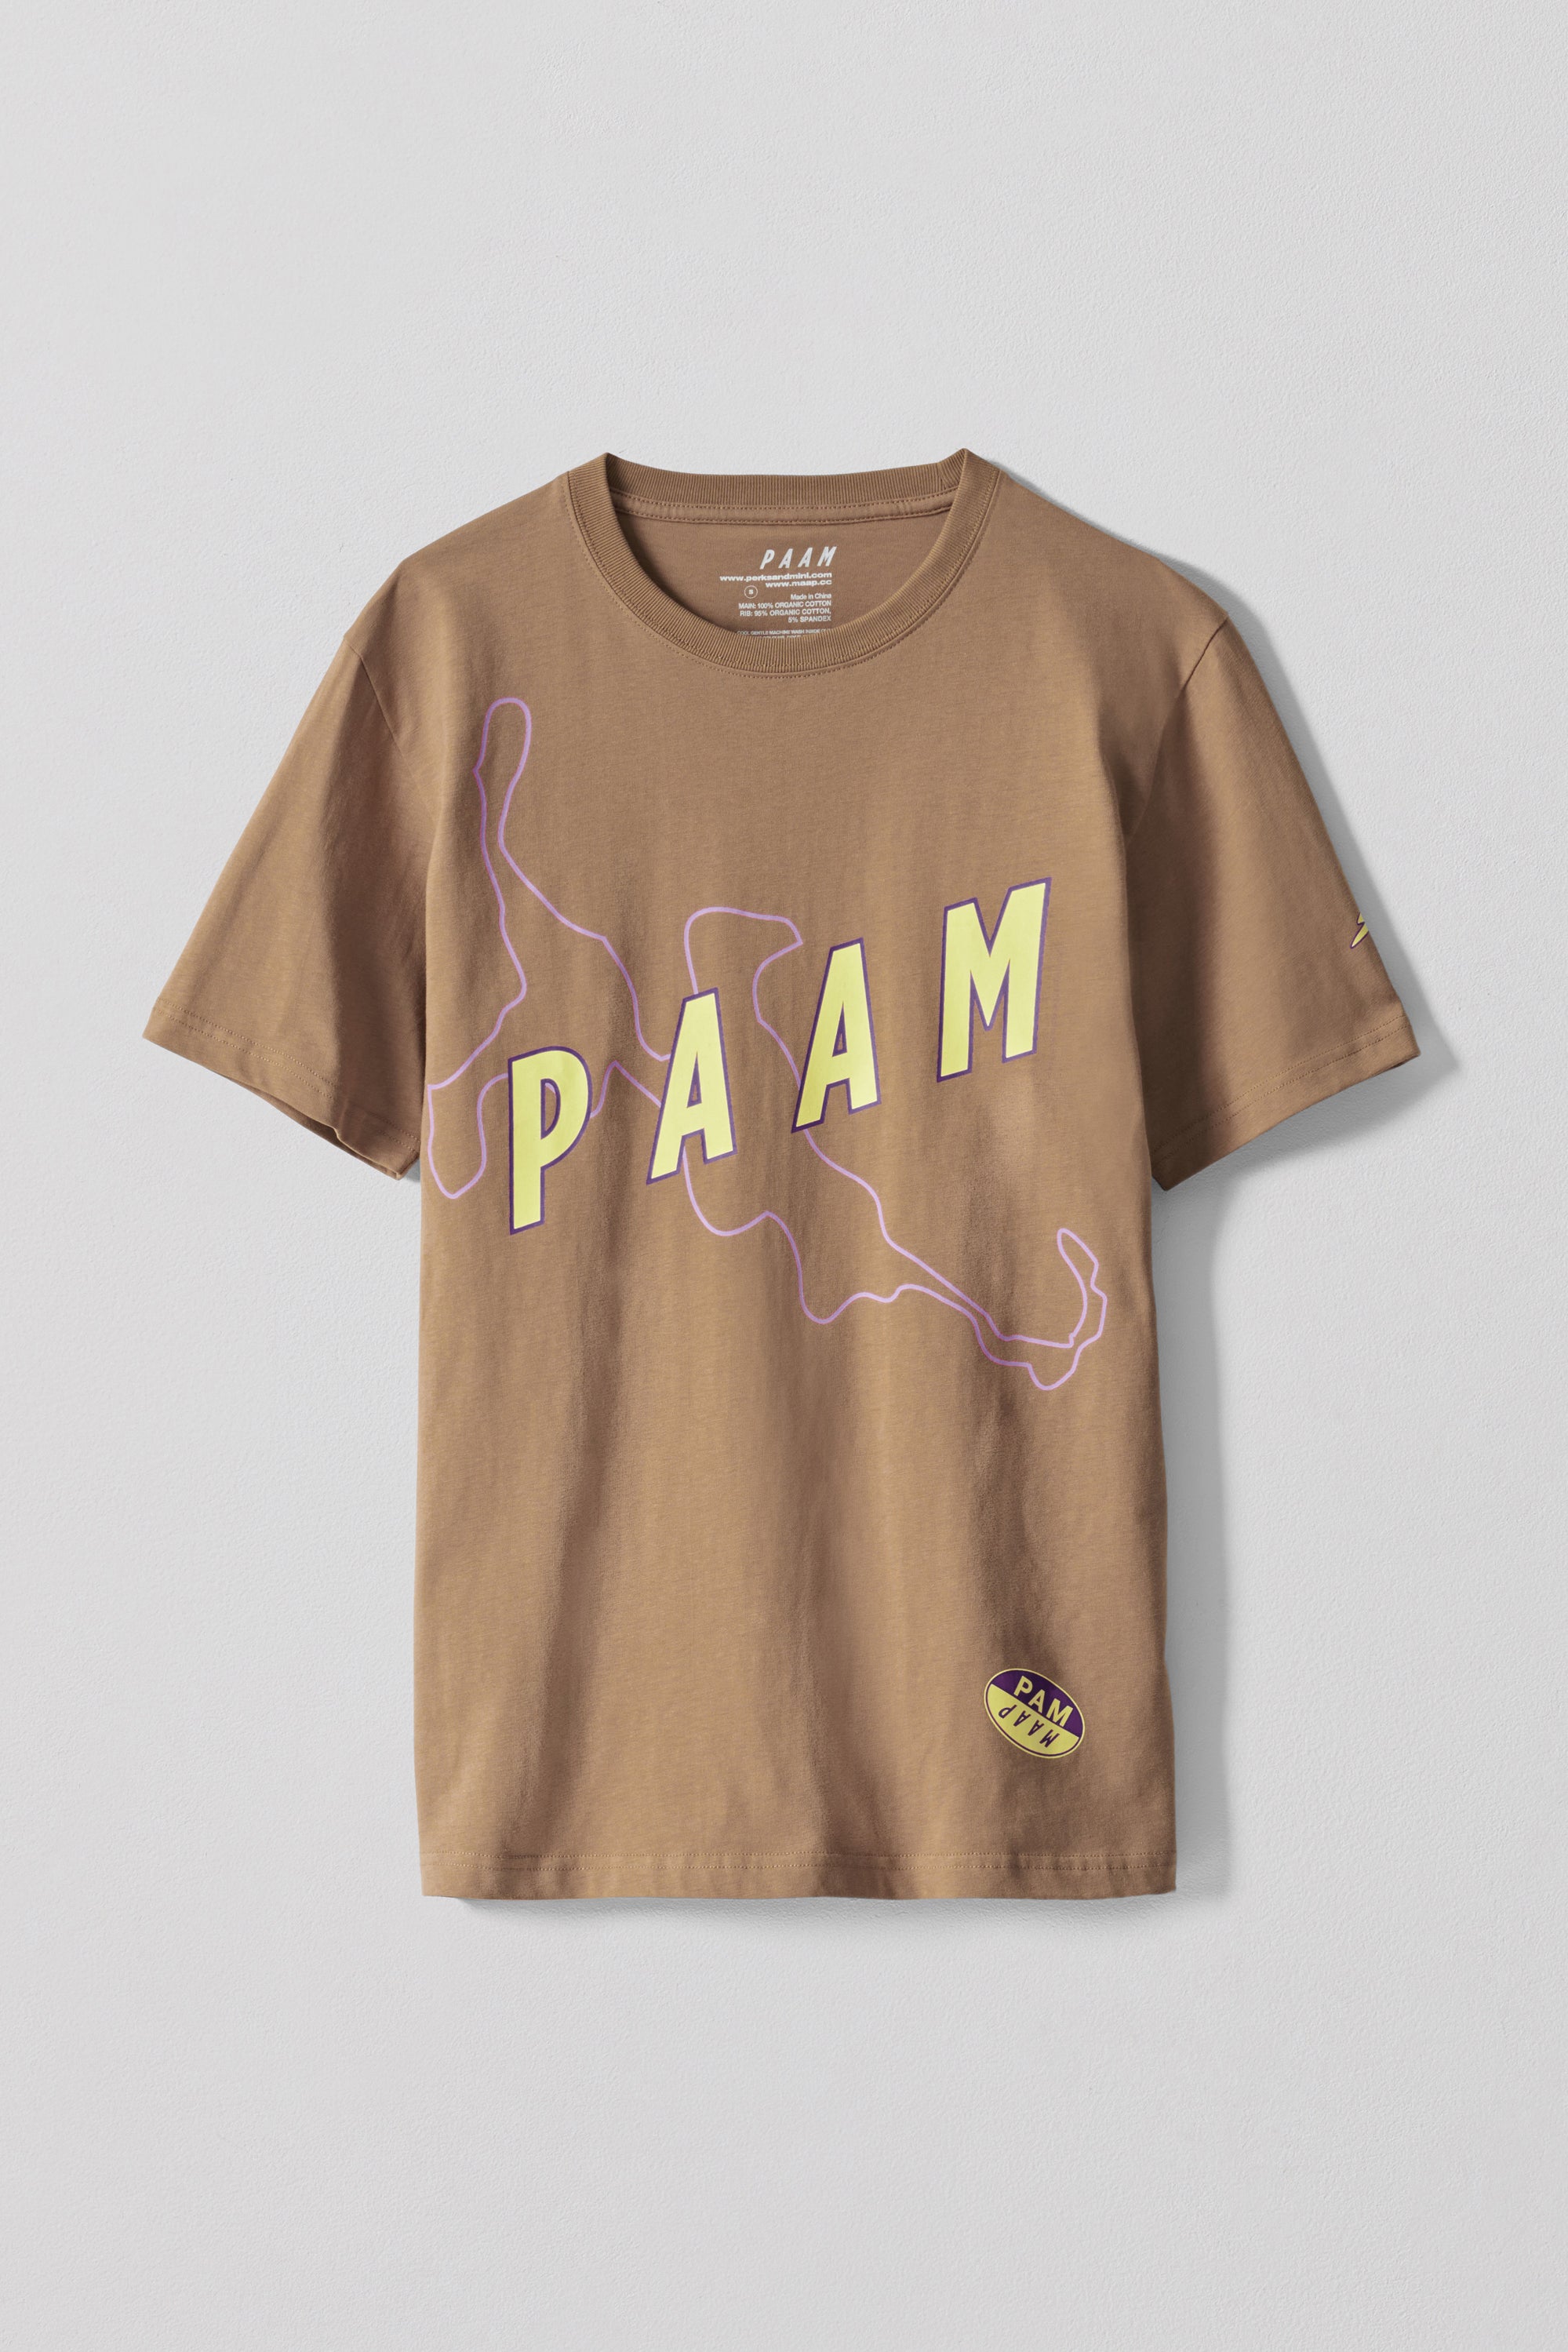 The PAAM 1.5 SS TEE BROWN available online with global shipping, and in PAM Stores Melbourne and Sydney.